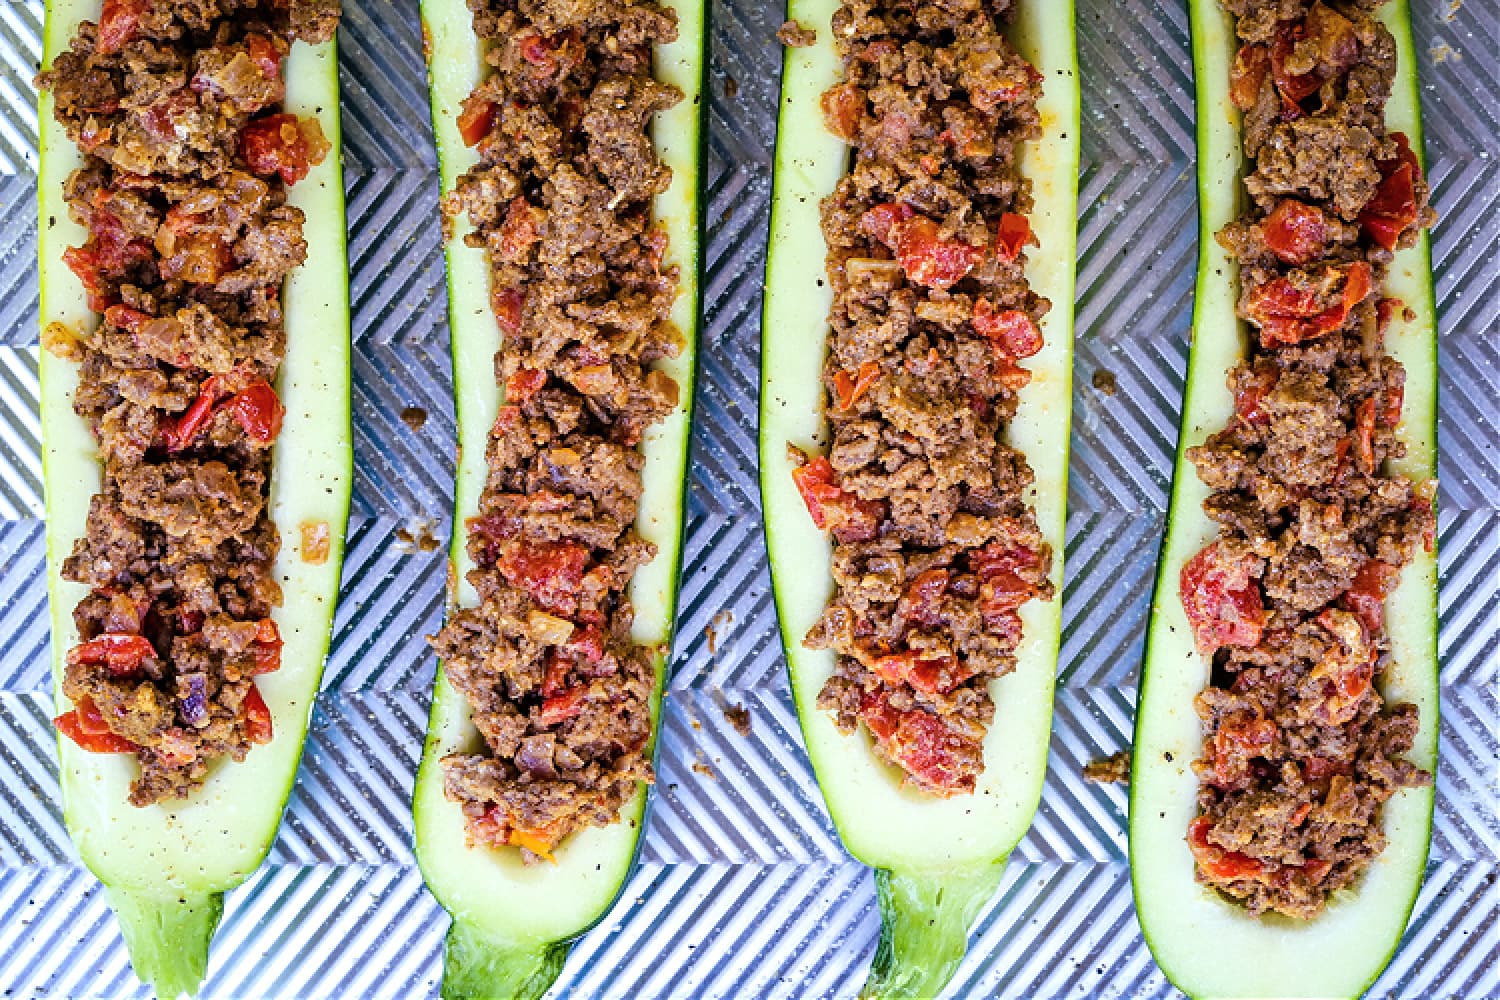 zucchini boats filled with a ground beef filling